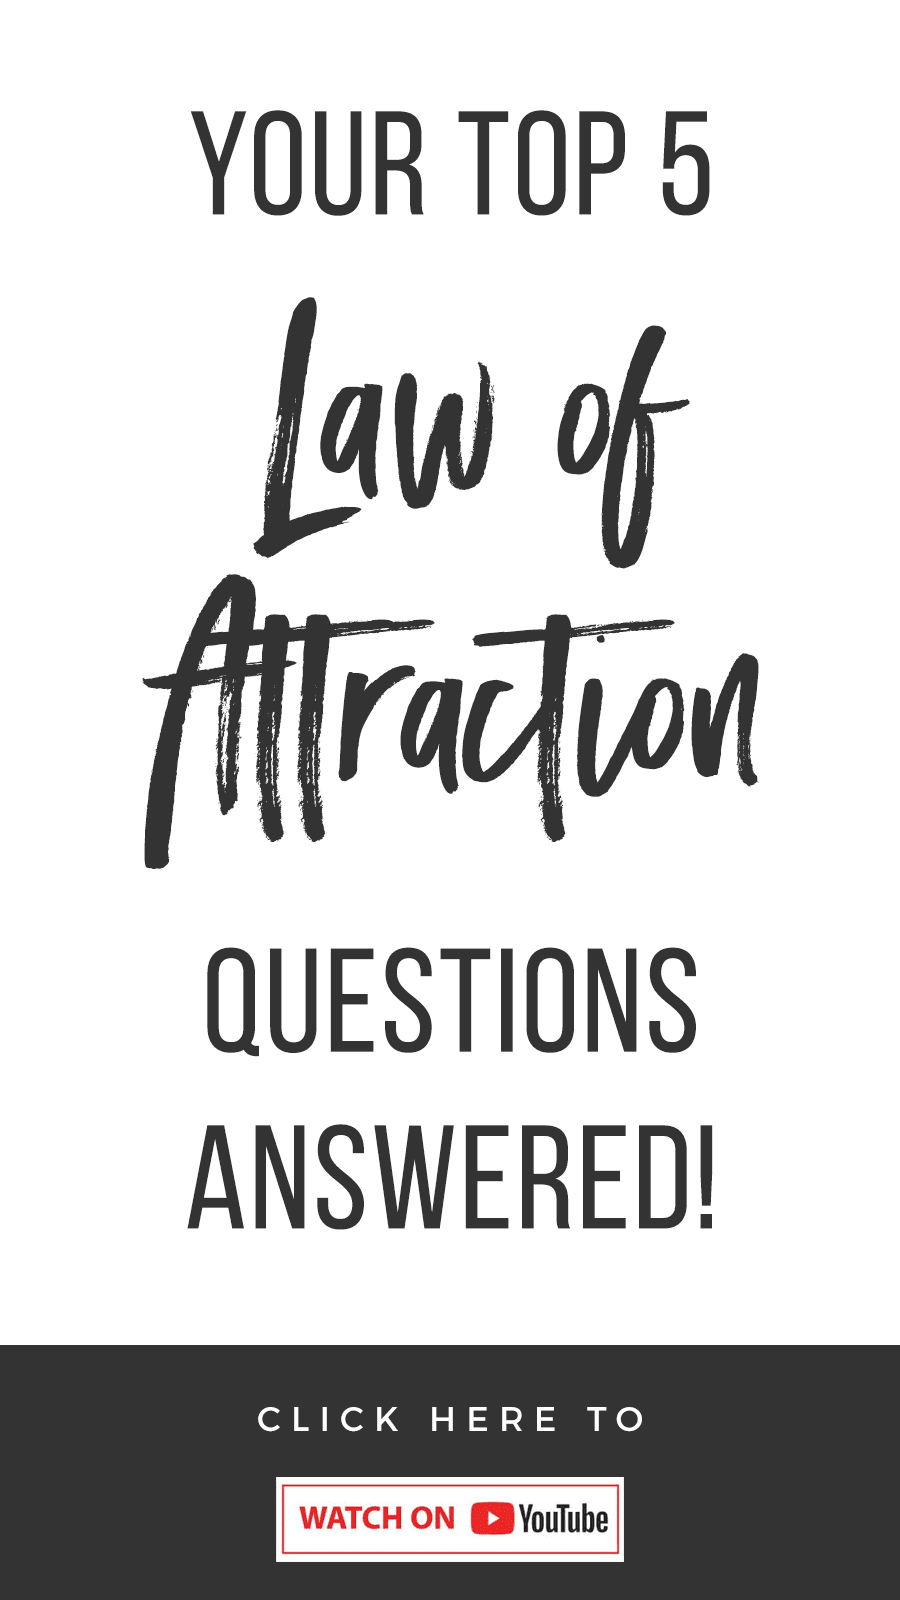 Your Top 5 Law of Attraction Questions Answered